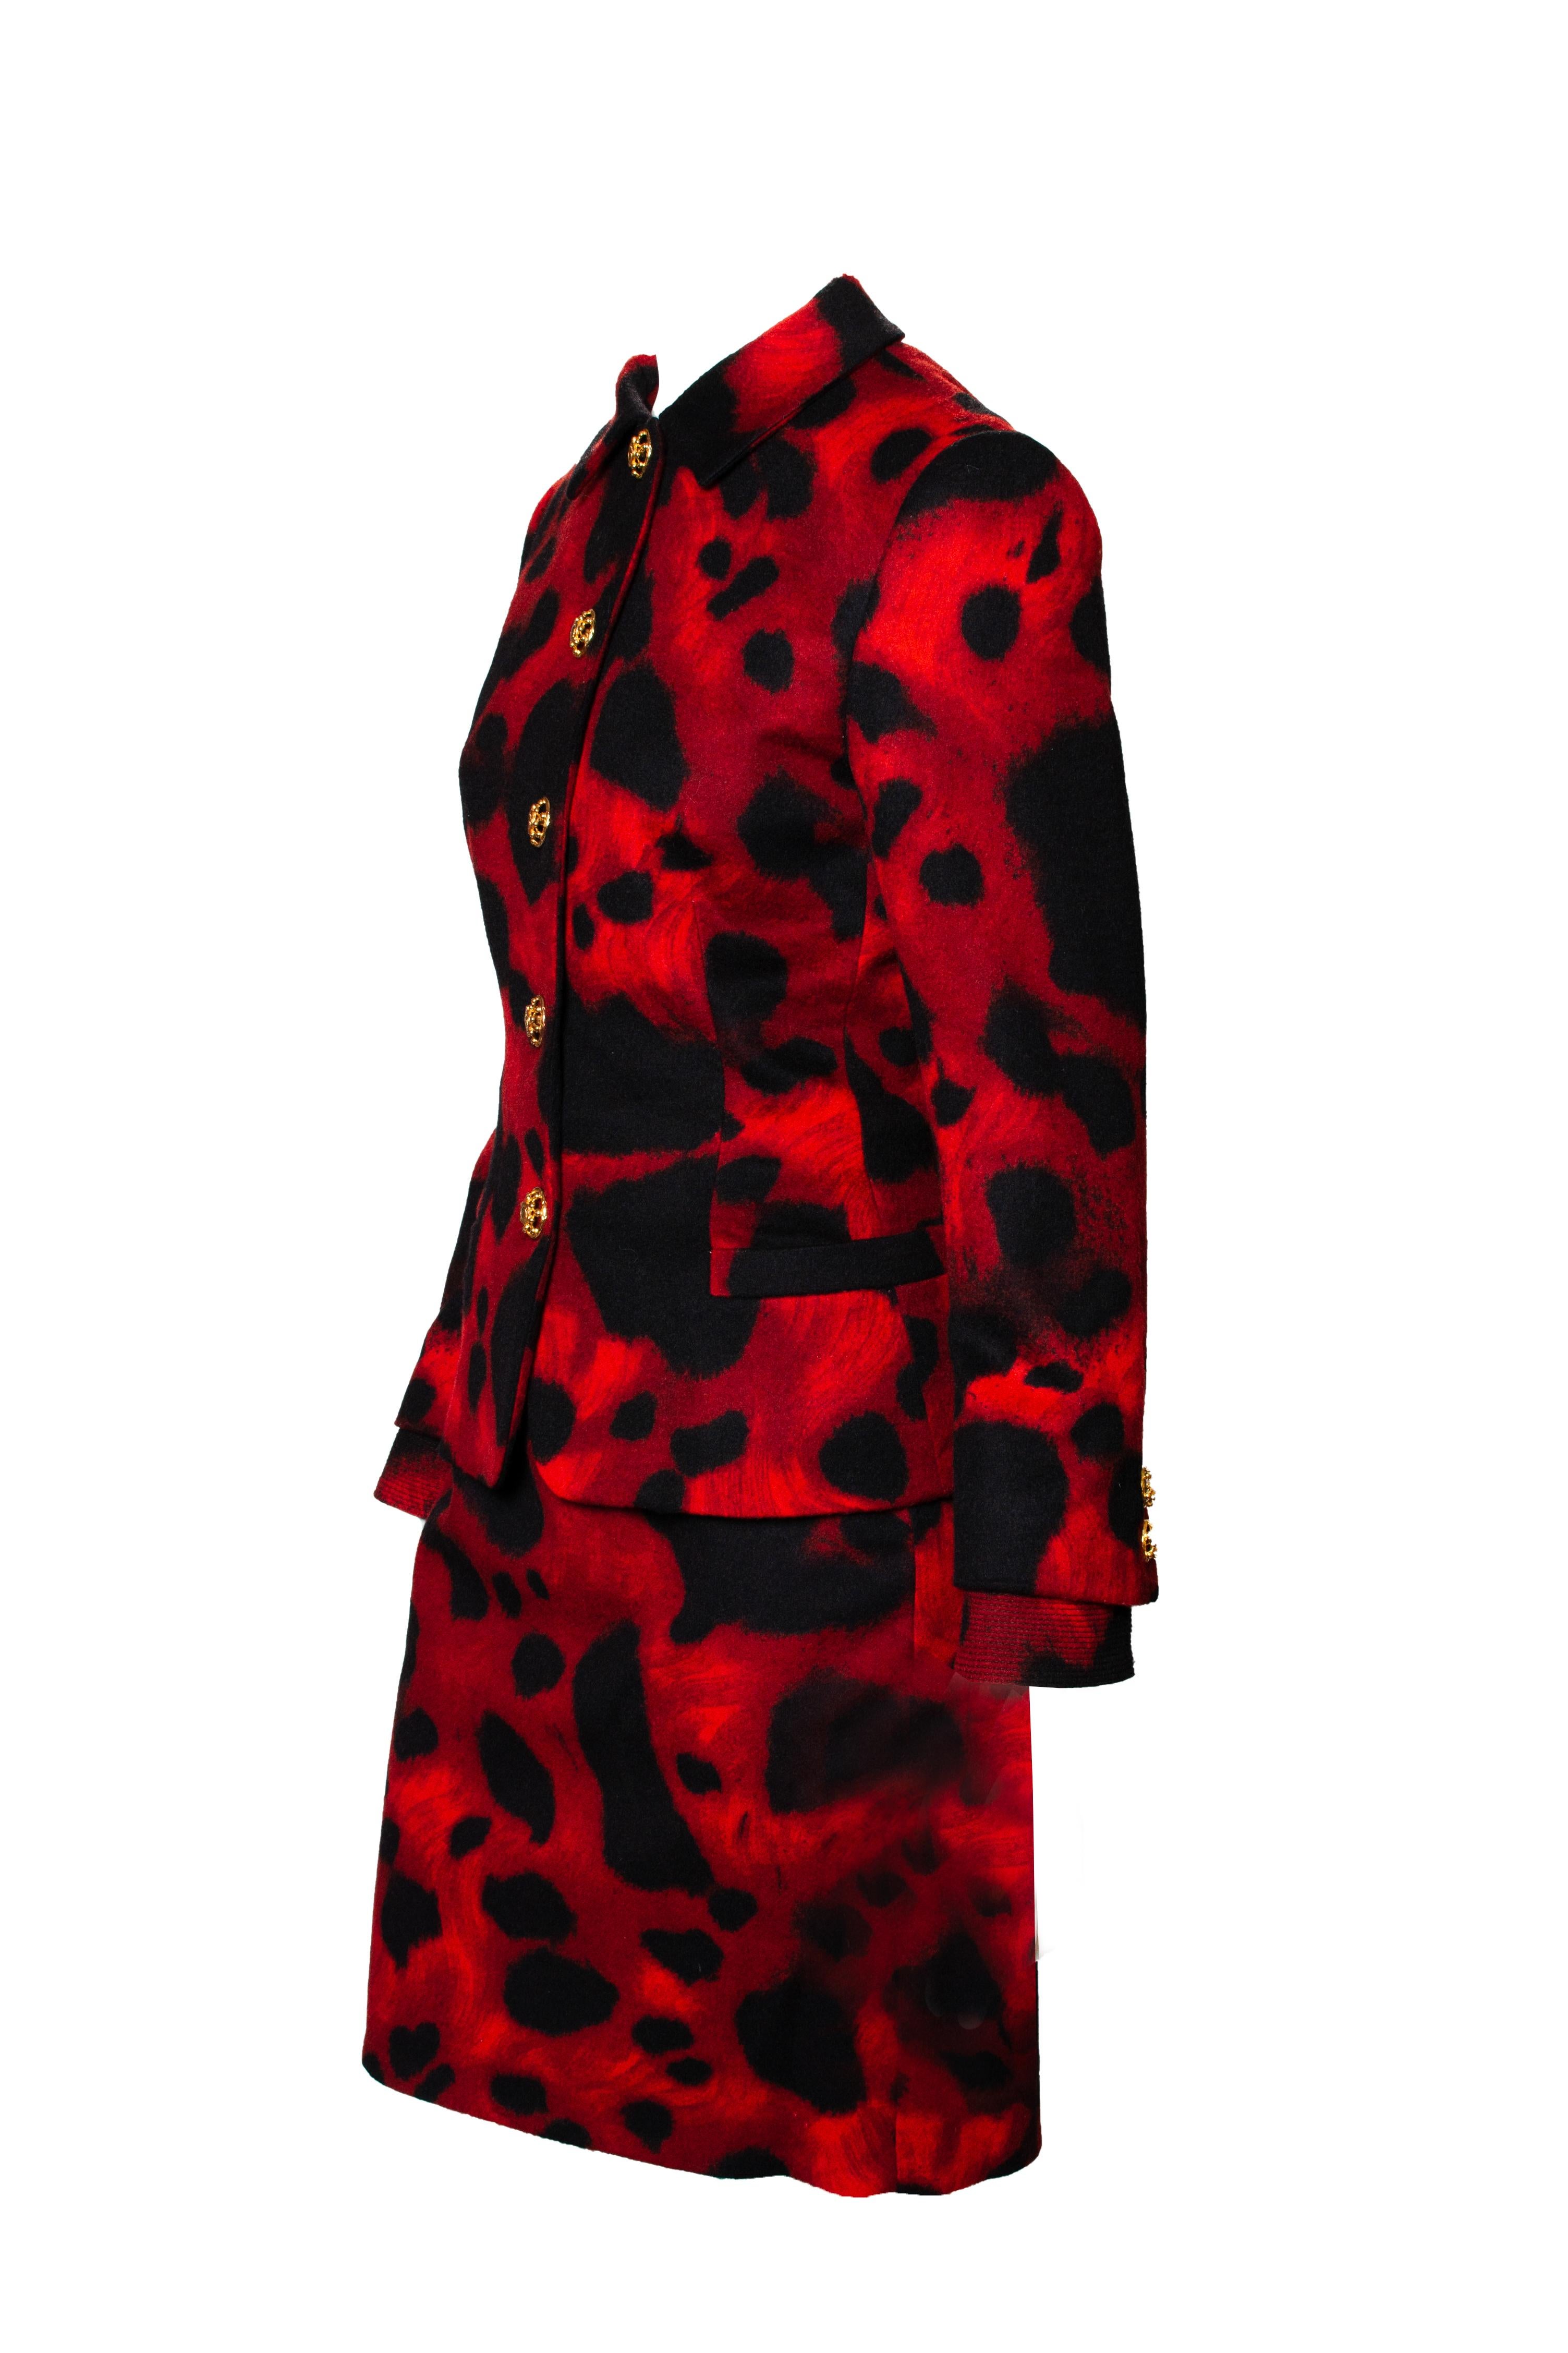 This classic red leopard print skirt suit is from Gianni Versace's Fall/Winter 1992 collection, designed by Gianni Versace. If this isn't a power suit, we are not sure we know what is. This set features a vibrant suit jacket with a matching skirt.